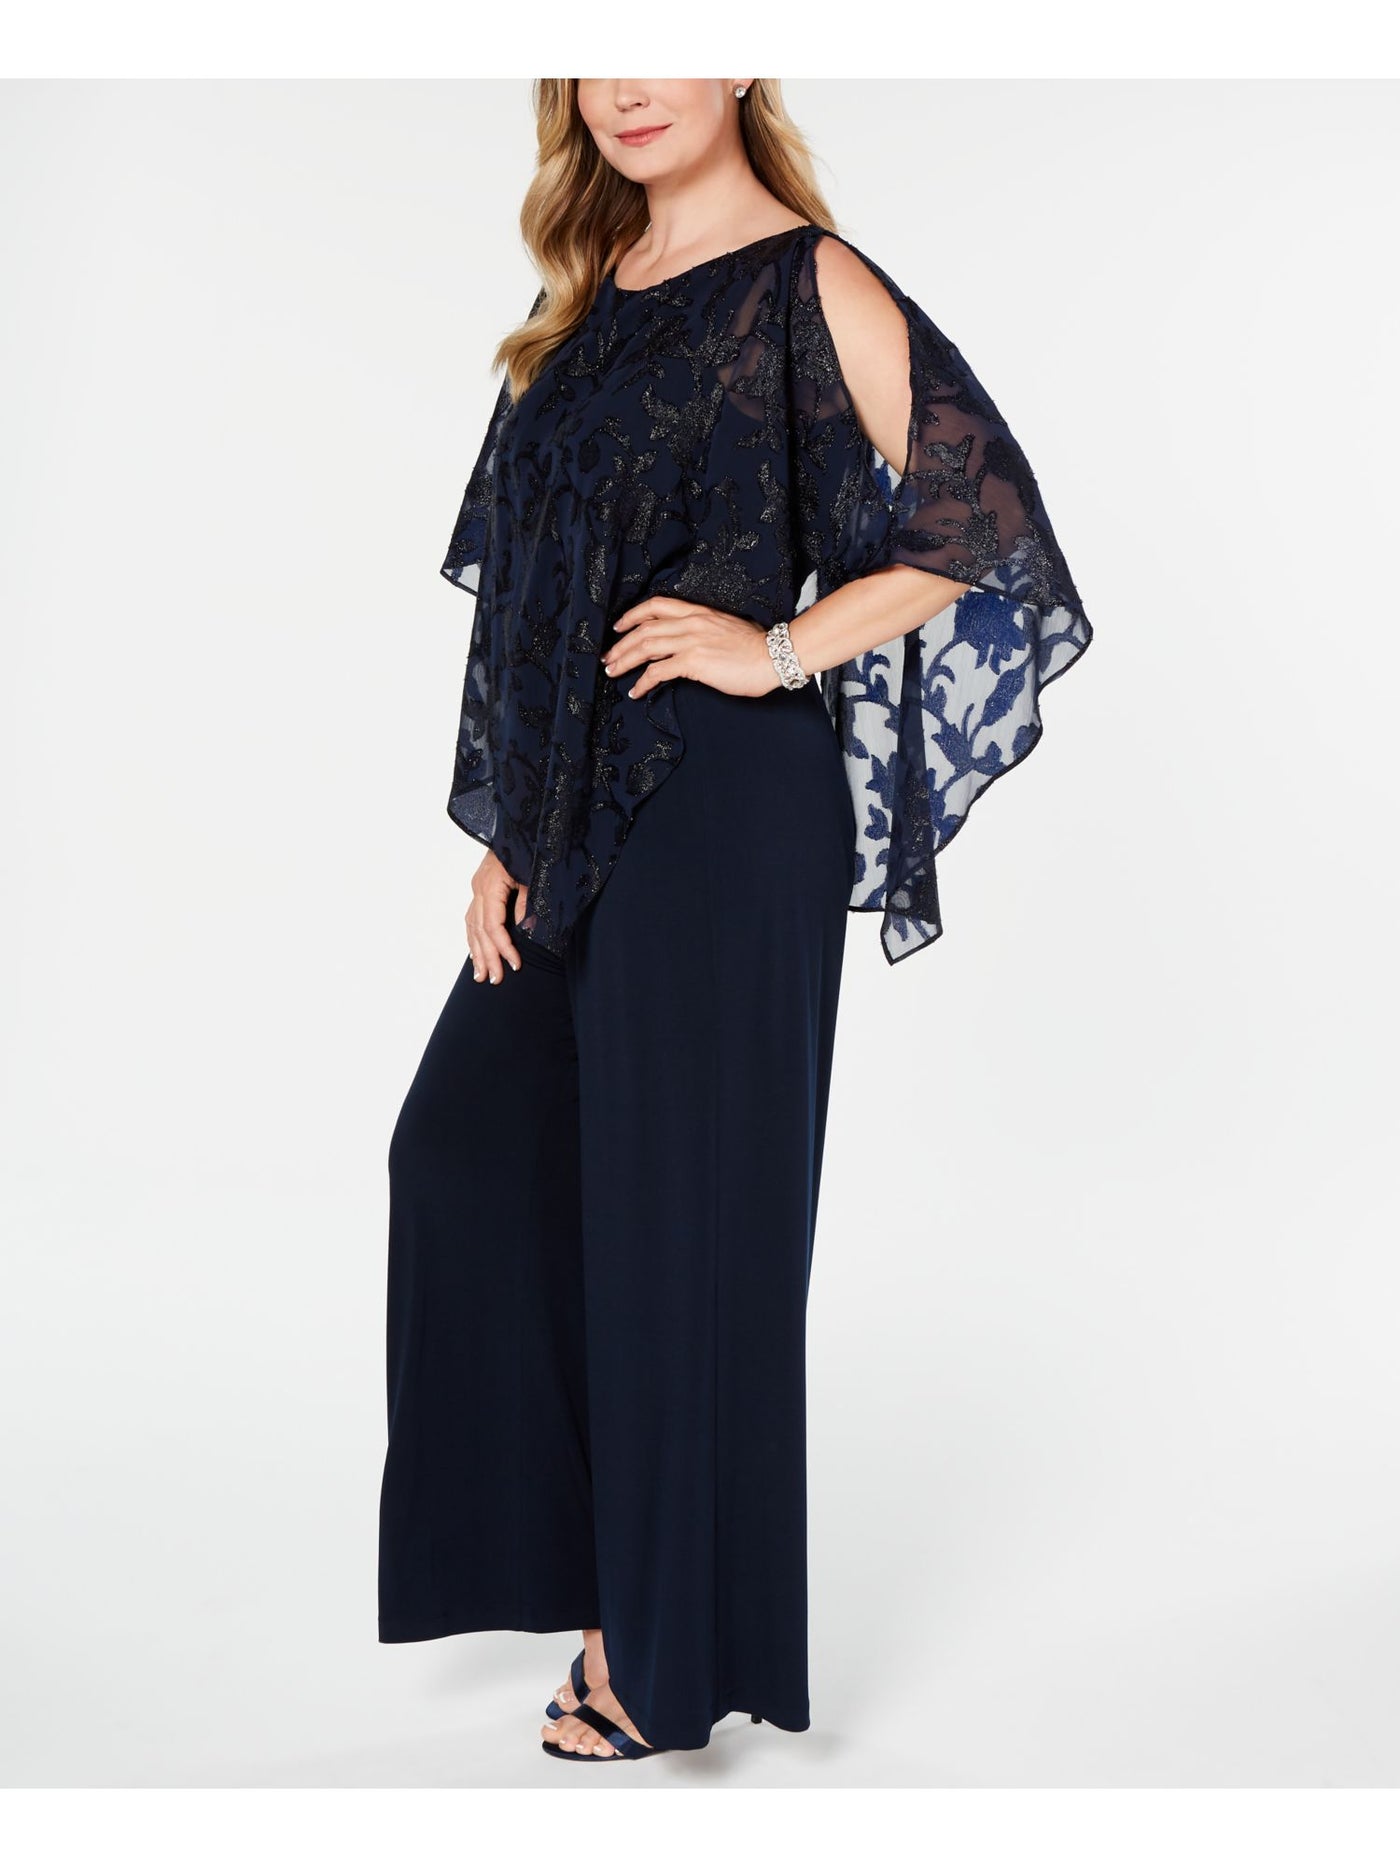 CONNECTED APPAREL Womens Navy 3/4 Sleeve Jewel Neck Cocktail Wide Leg Jumpsuit Plus 22W